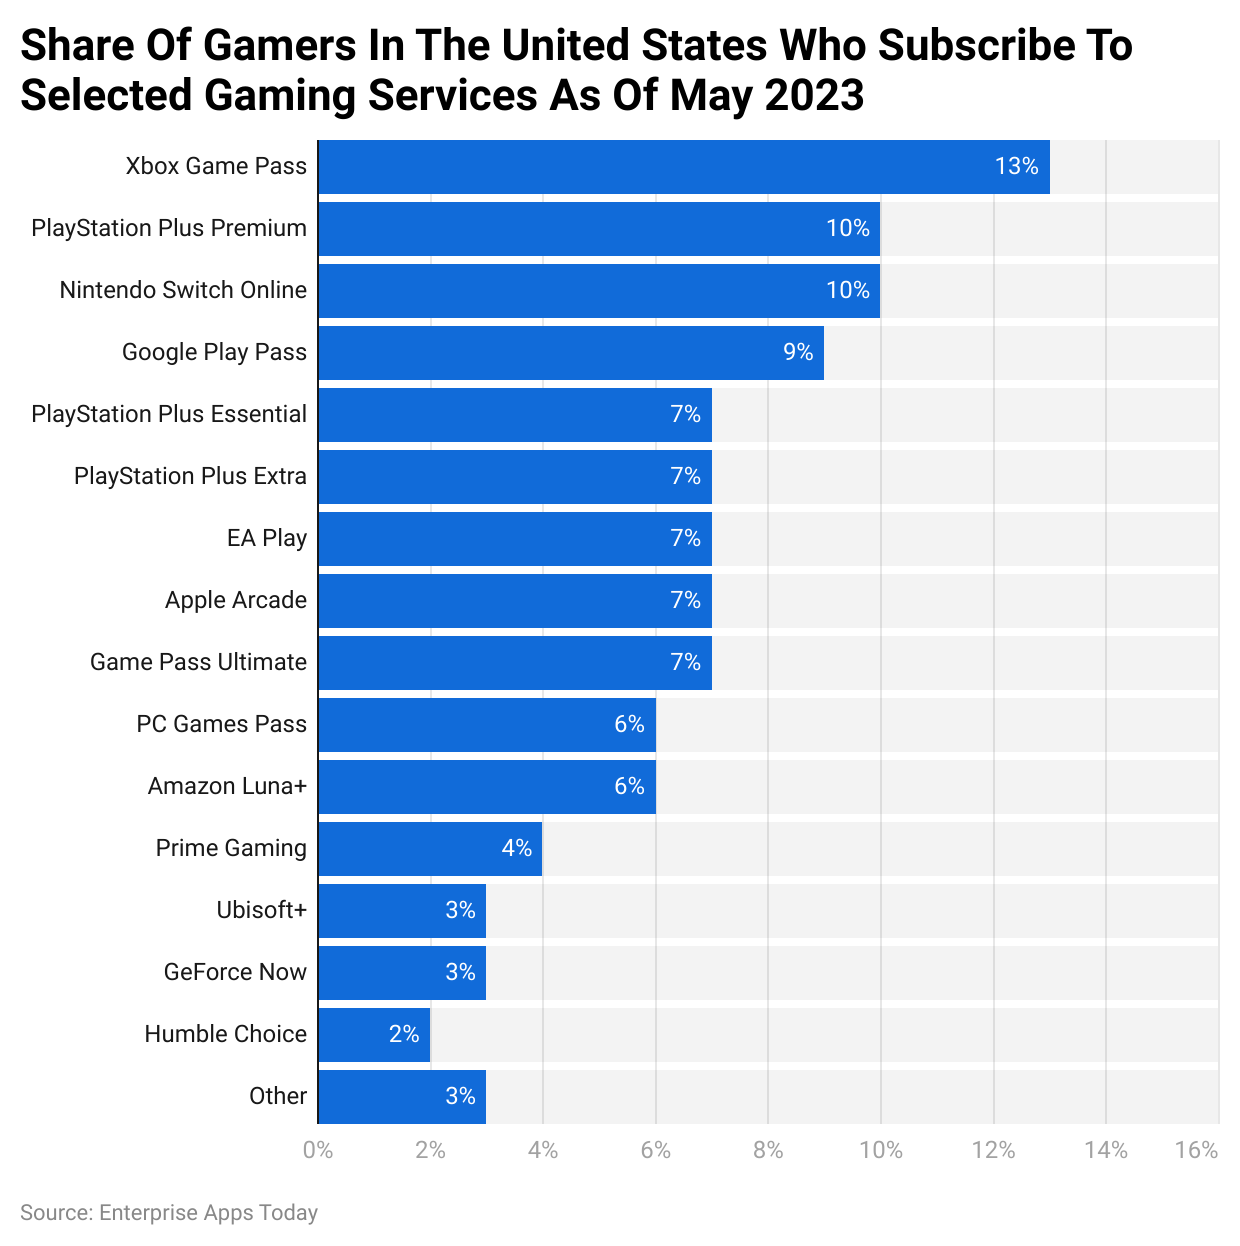 Share of gamers in the United States who subscribe to selected gaming services as of May 2023